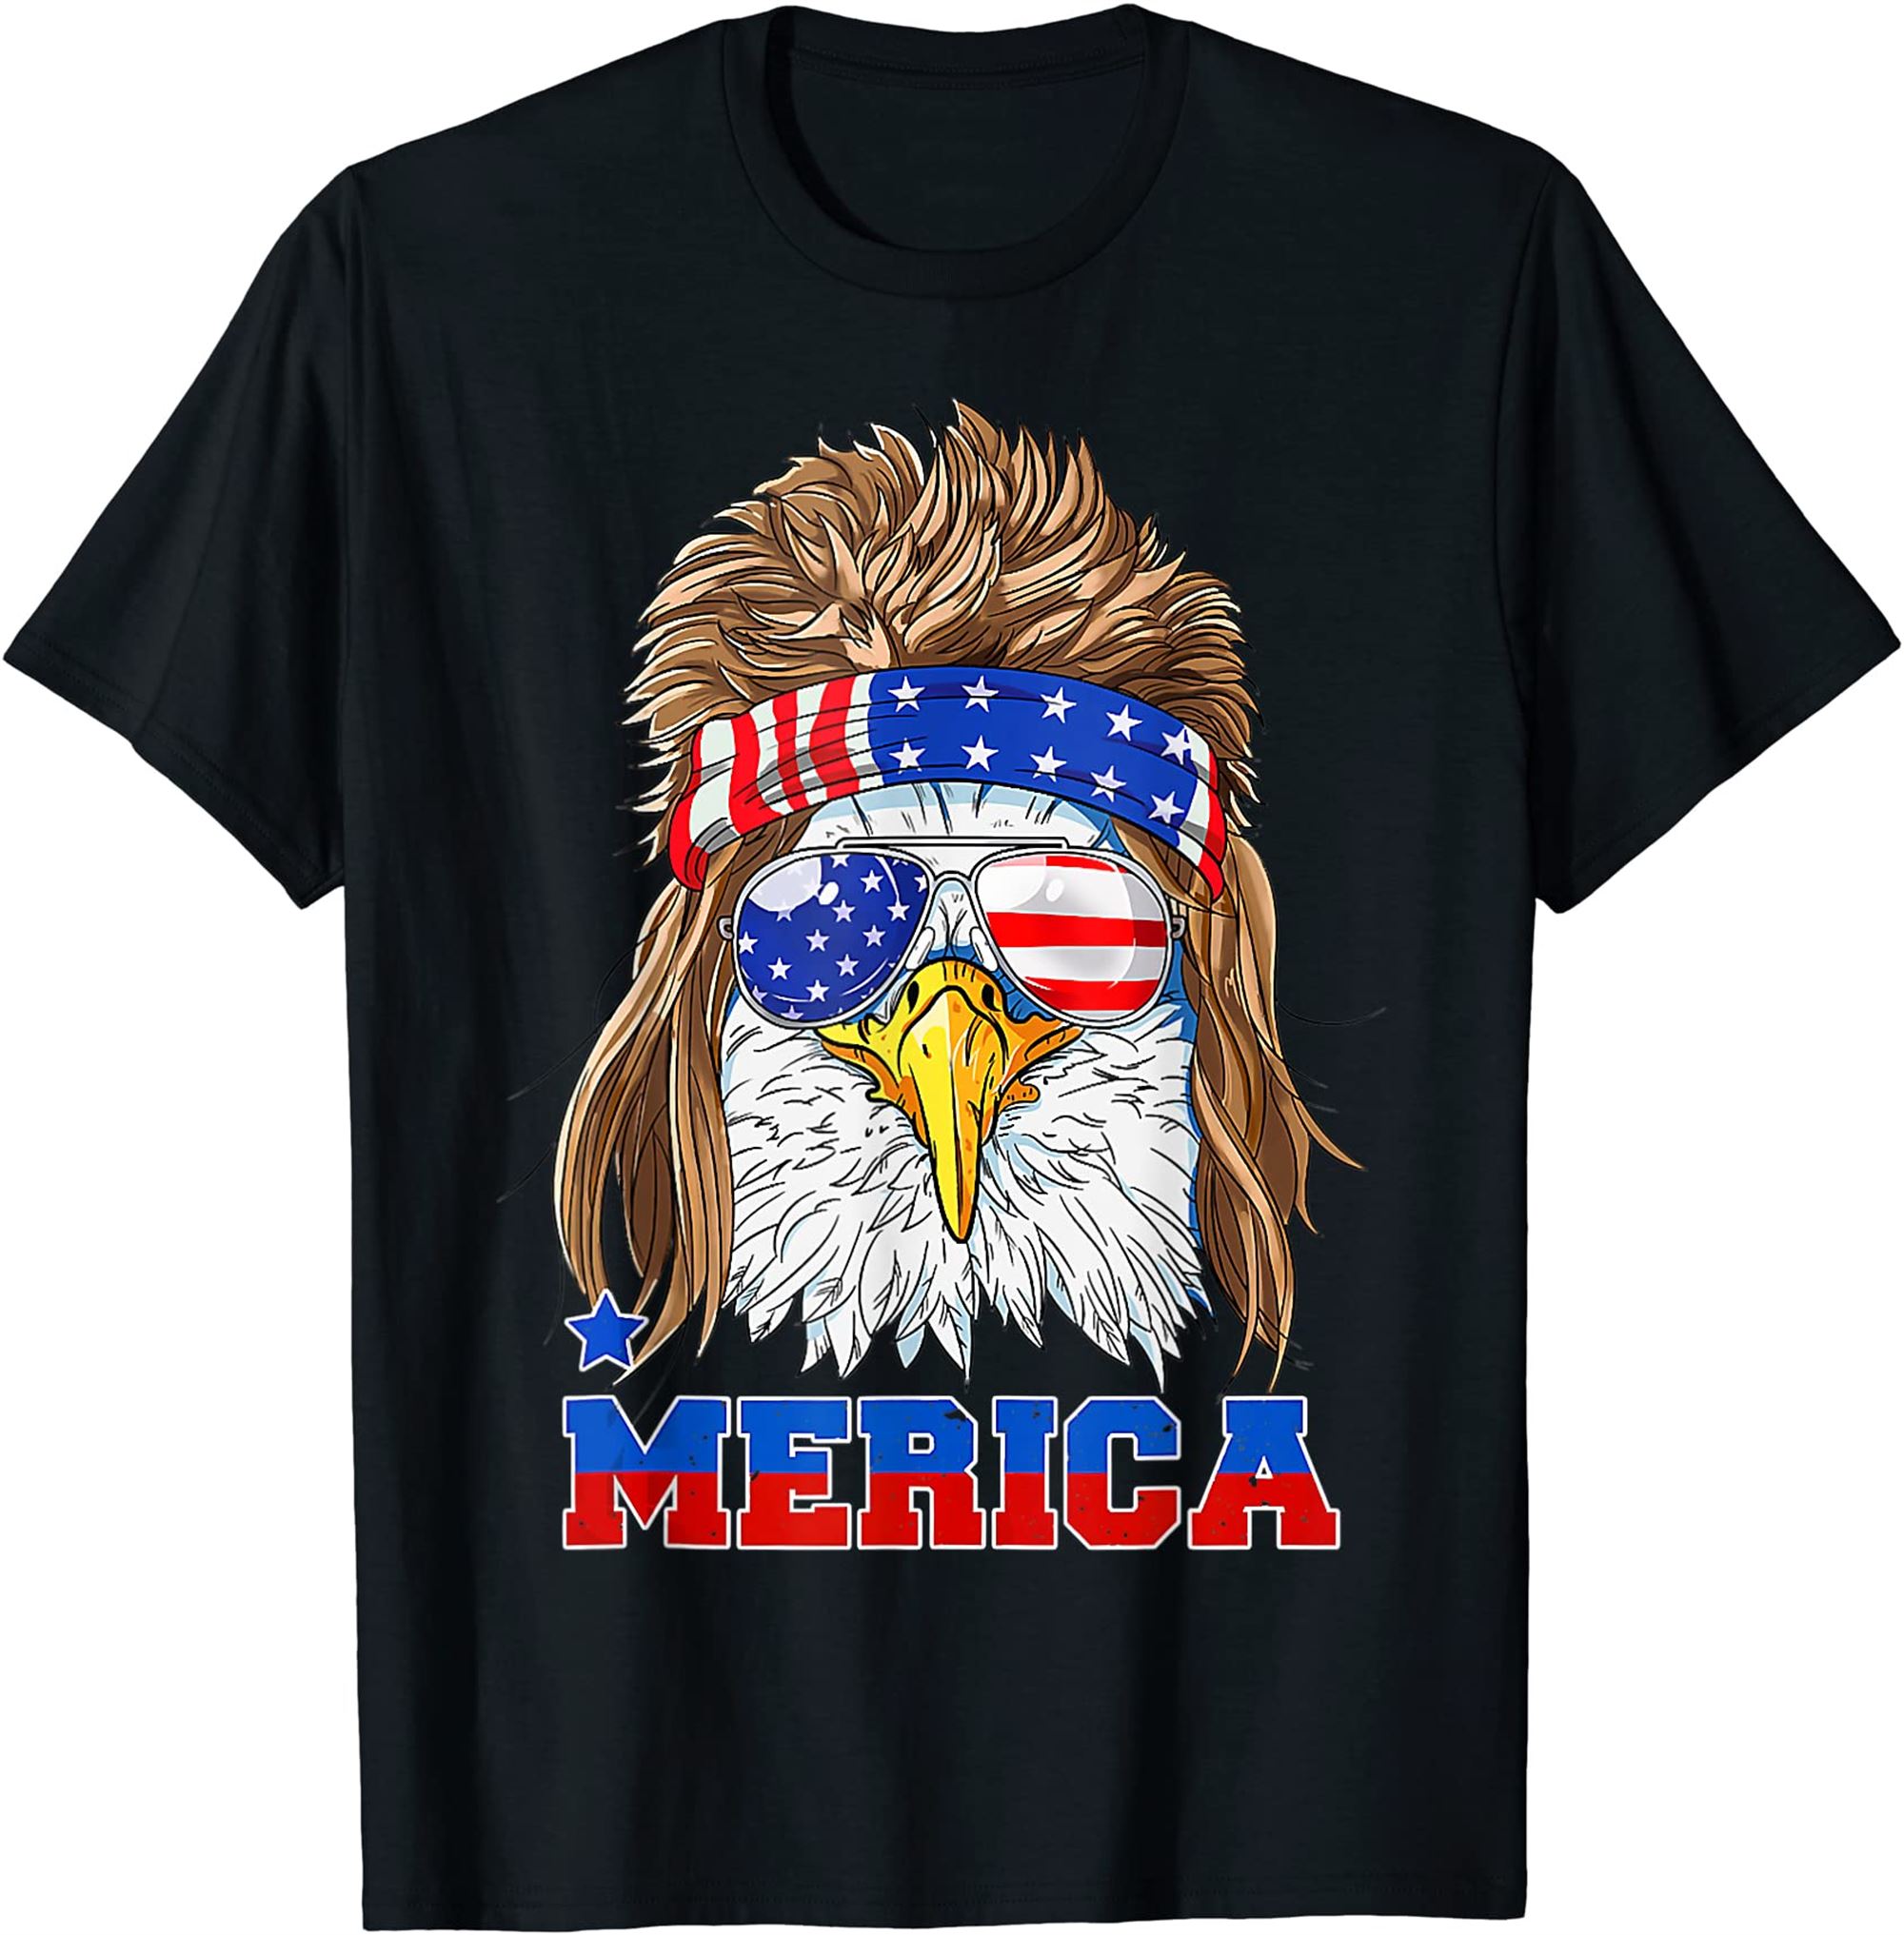 Eagle Mullet Merica Shirt Men 4th Of July American Flag Usa T-shirt Full Size Up To 5xl